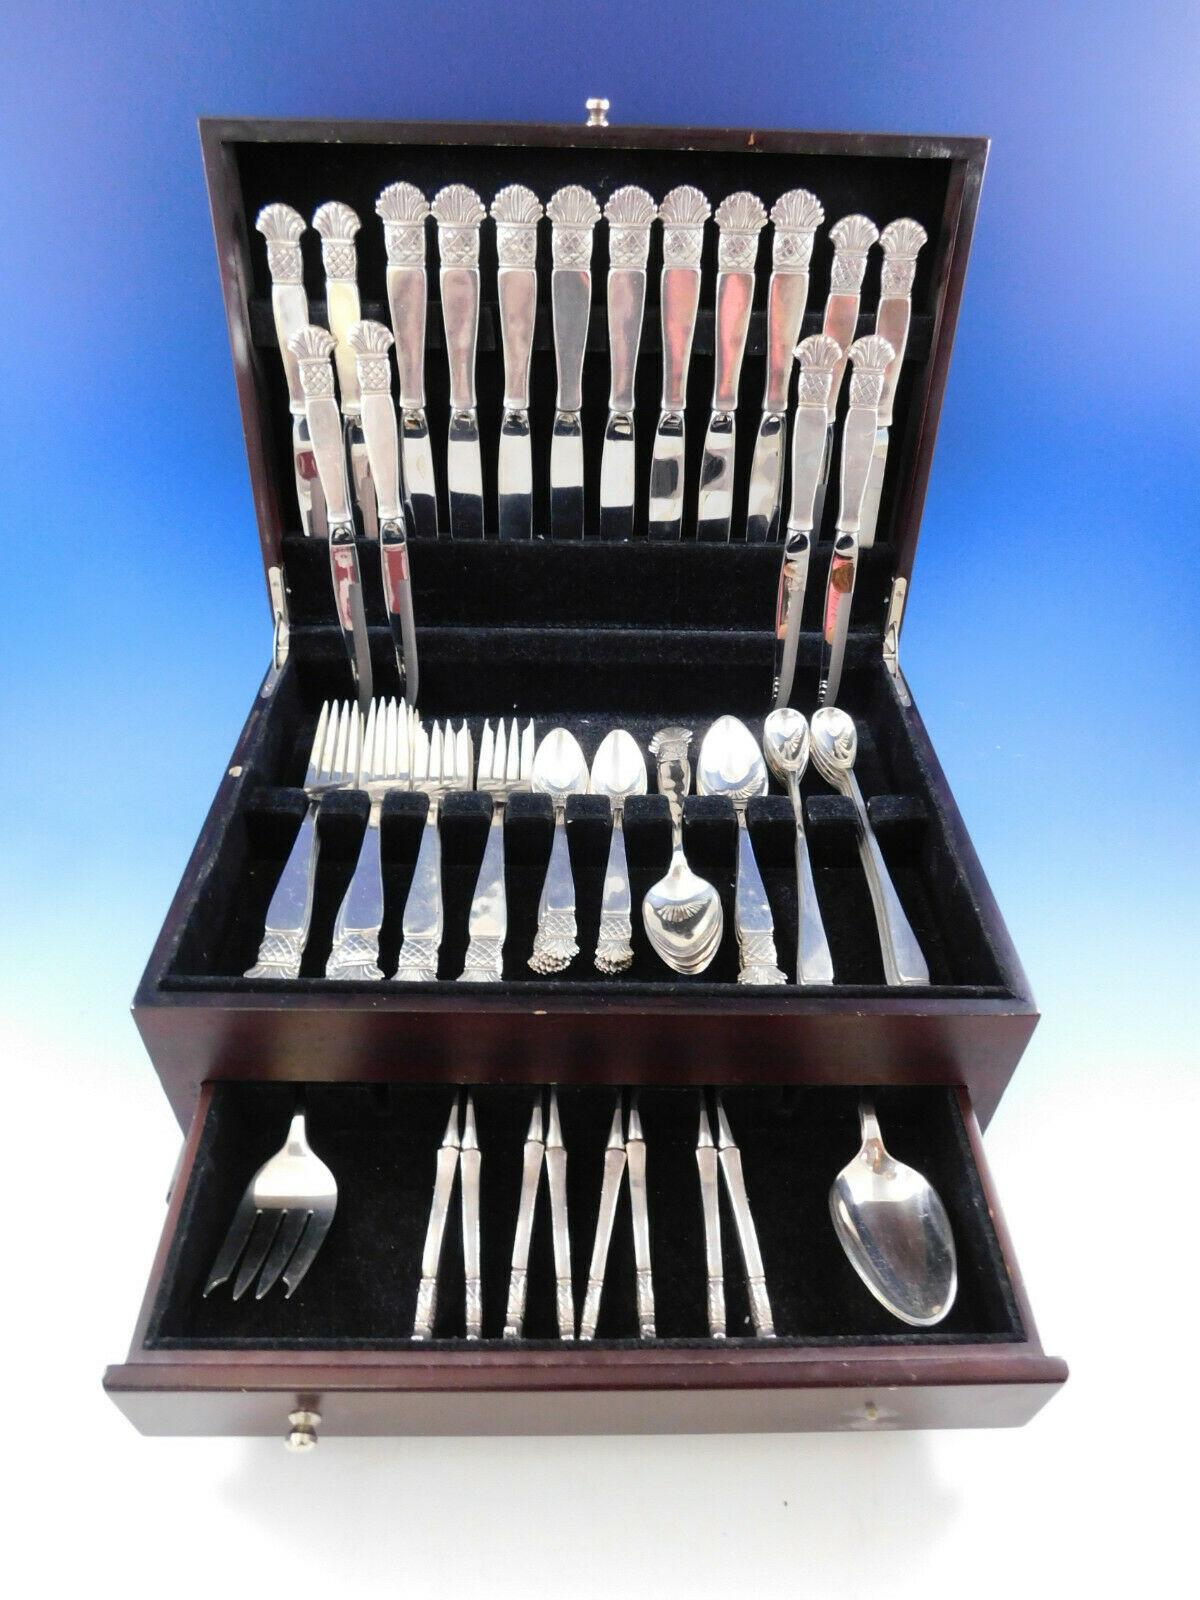 Superb 67 piece dinner size sterling silver set of Grenada made by Old Newbury Crafters. It is beautifully hand wrought and heavy with innovative solid handle knives. The set includes:

8 dinner size knives w/solid handles, stainless blades, 9